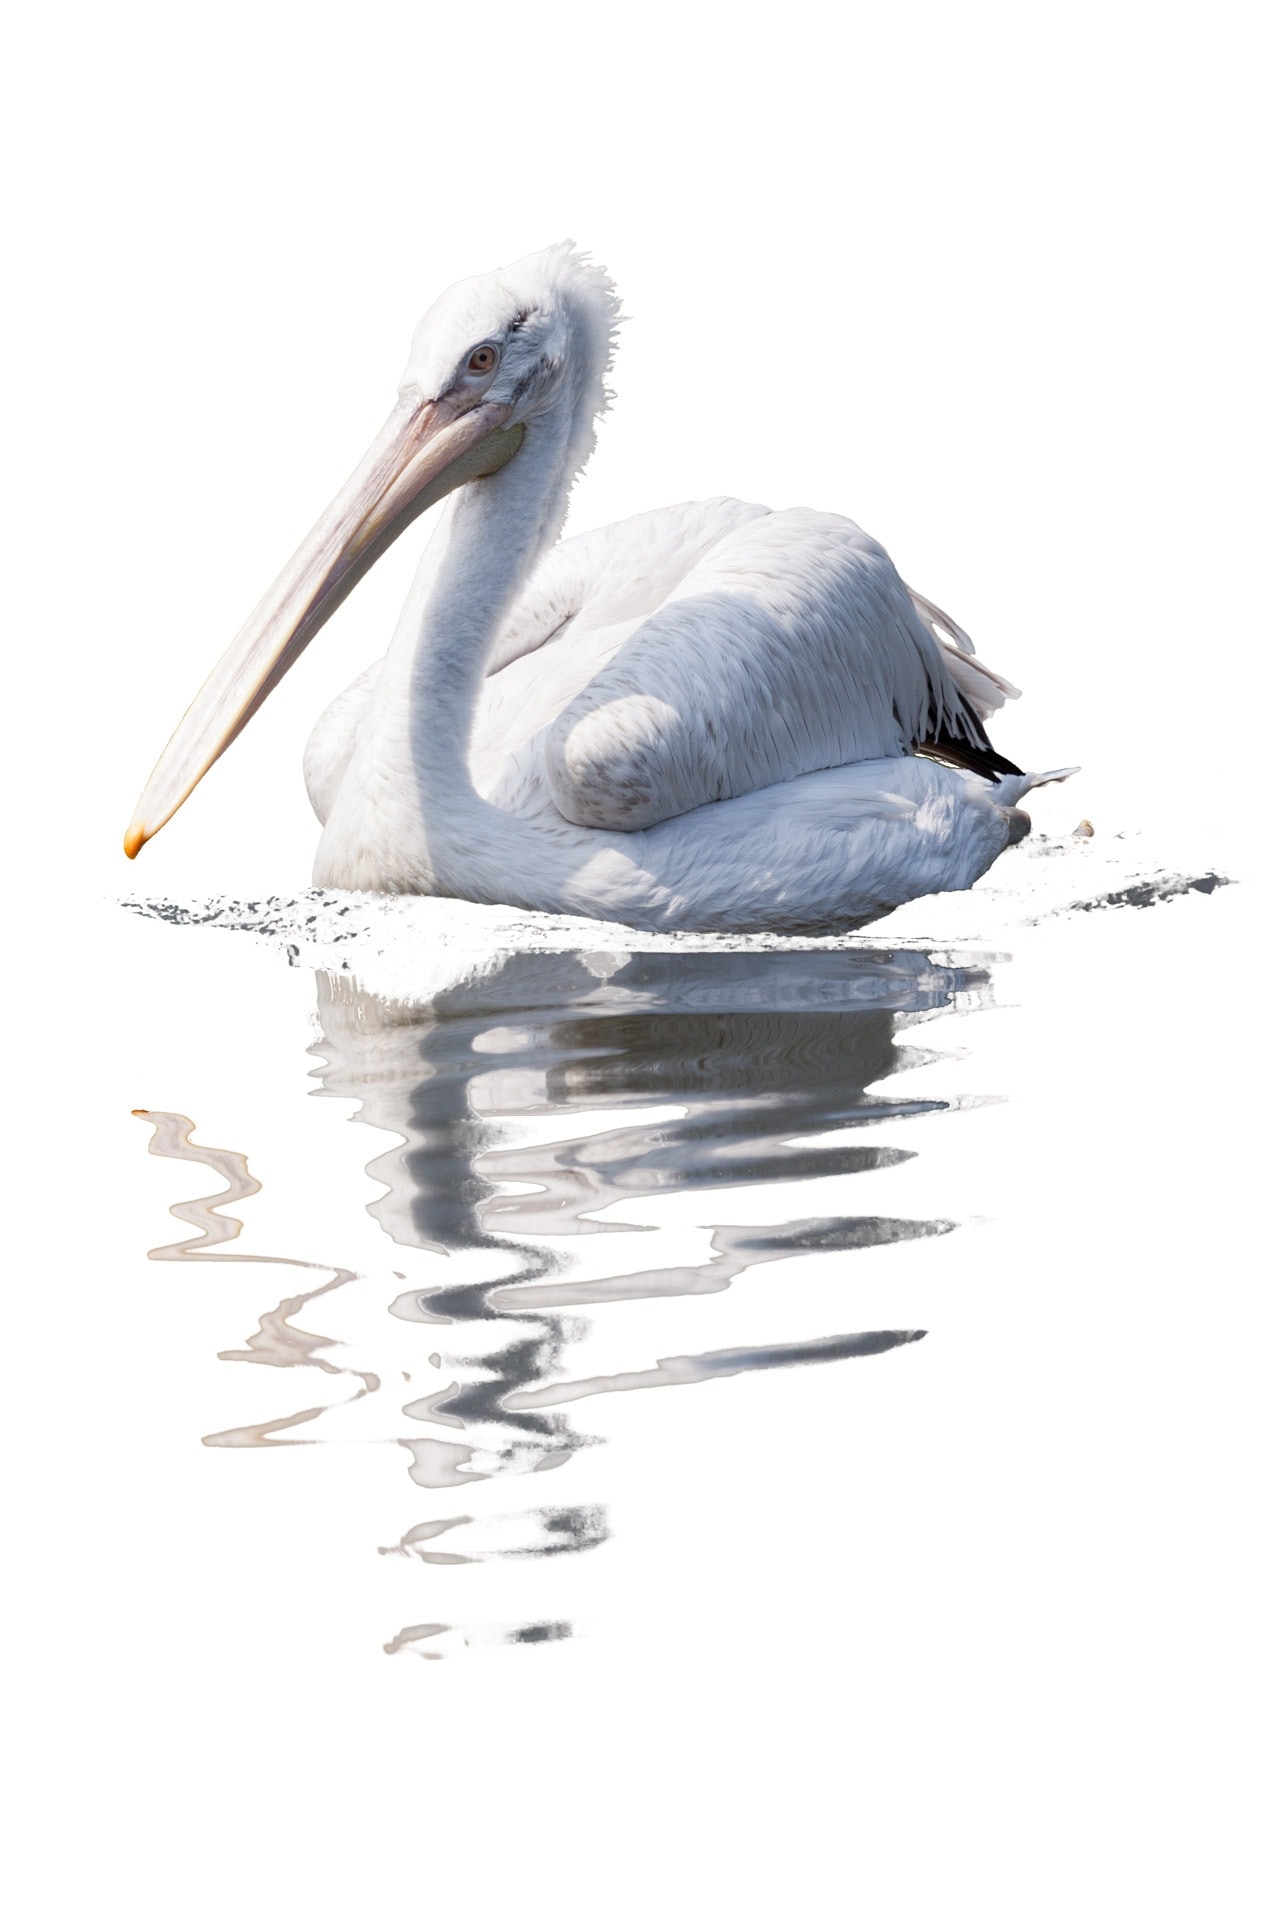 photography of white bird on body of water